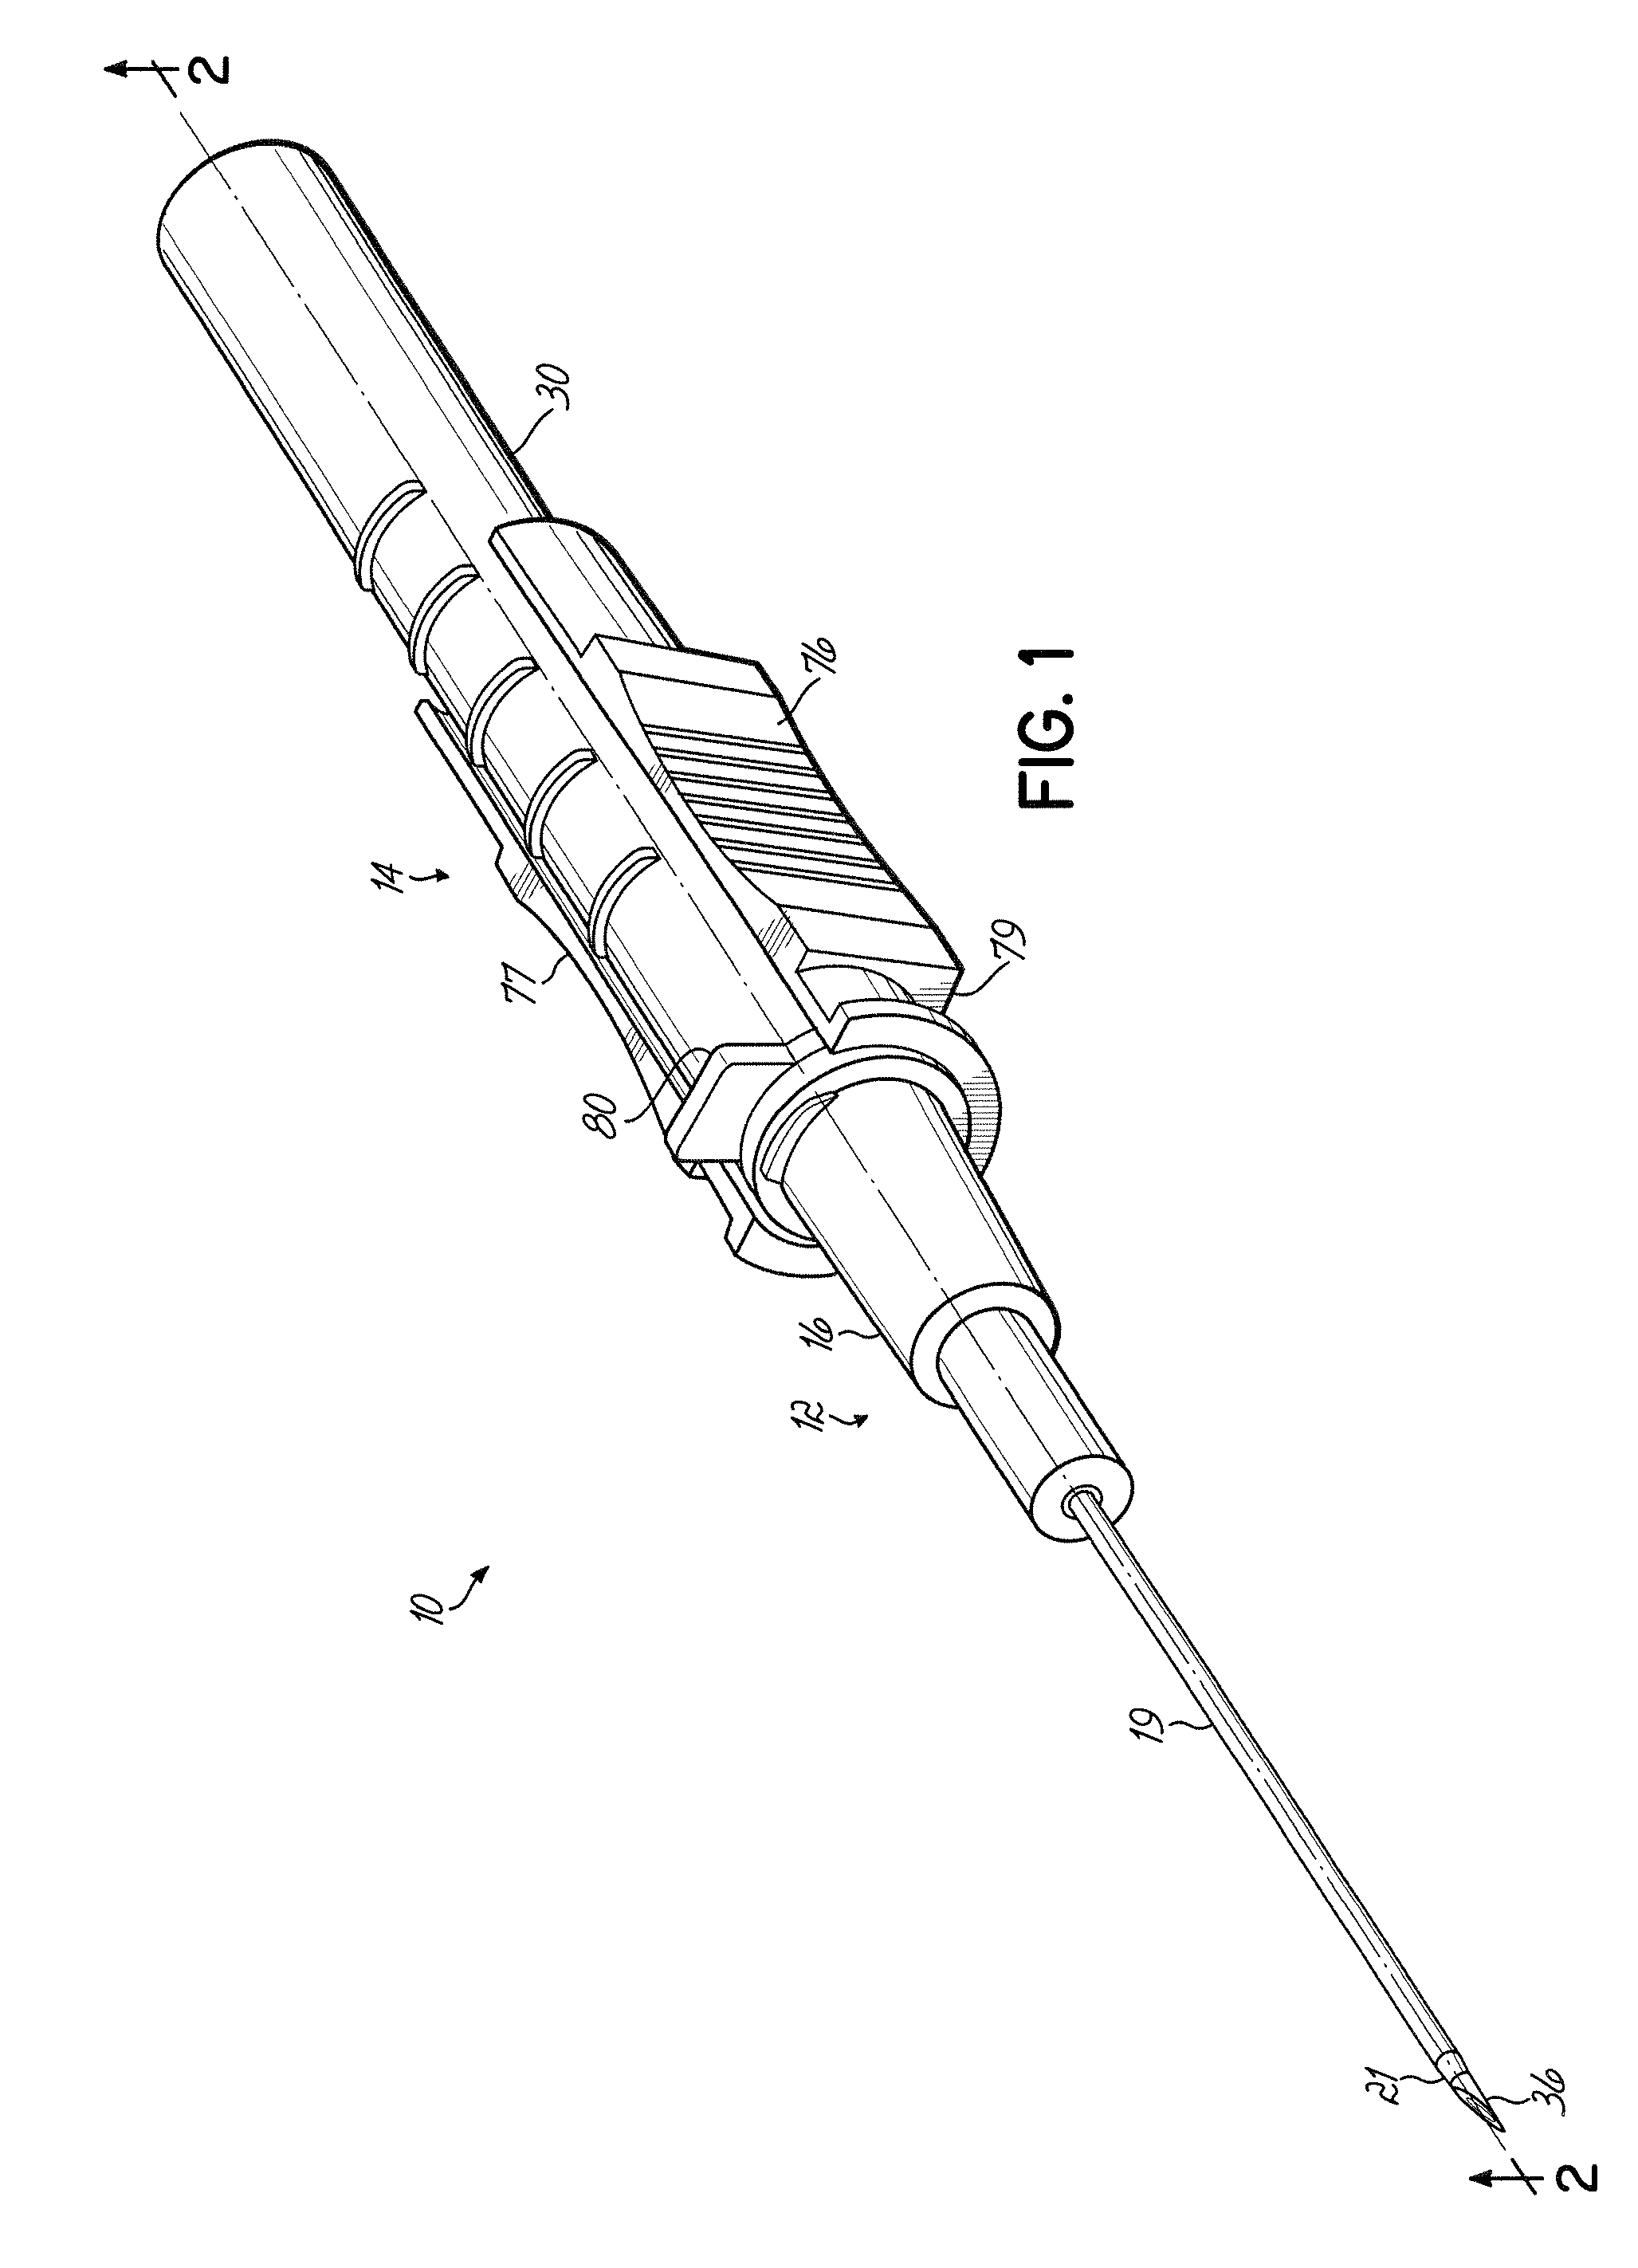 Enclosed Needle Device with Duckbill Release Mechanism